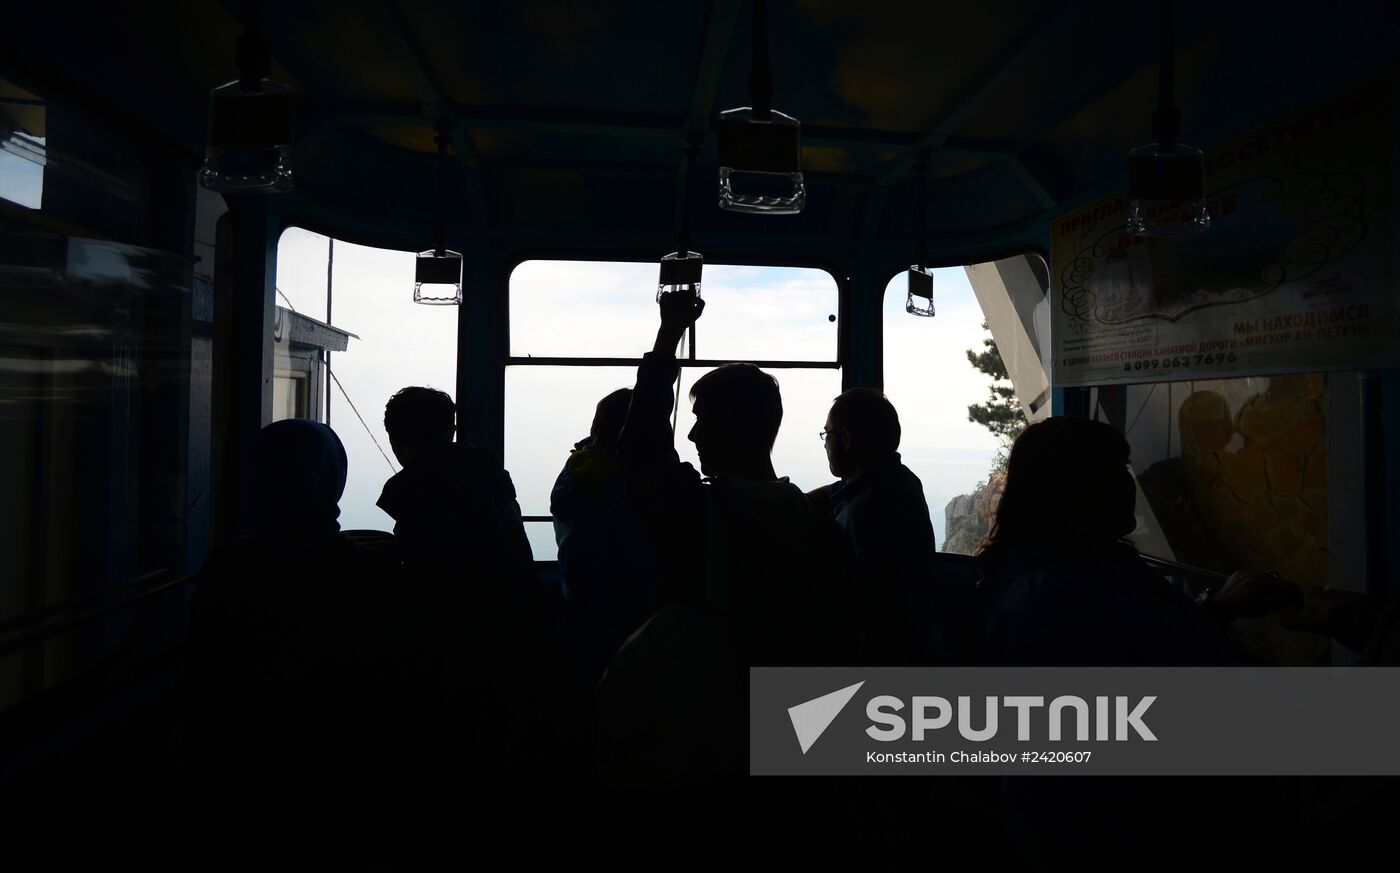 Miskhor - Ai-Petri cableway commissioned in Crimea after repair works